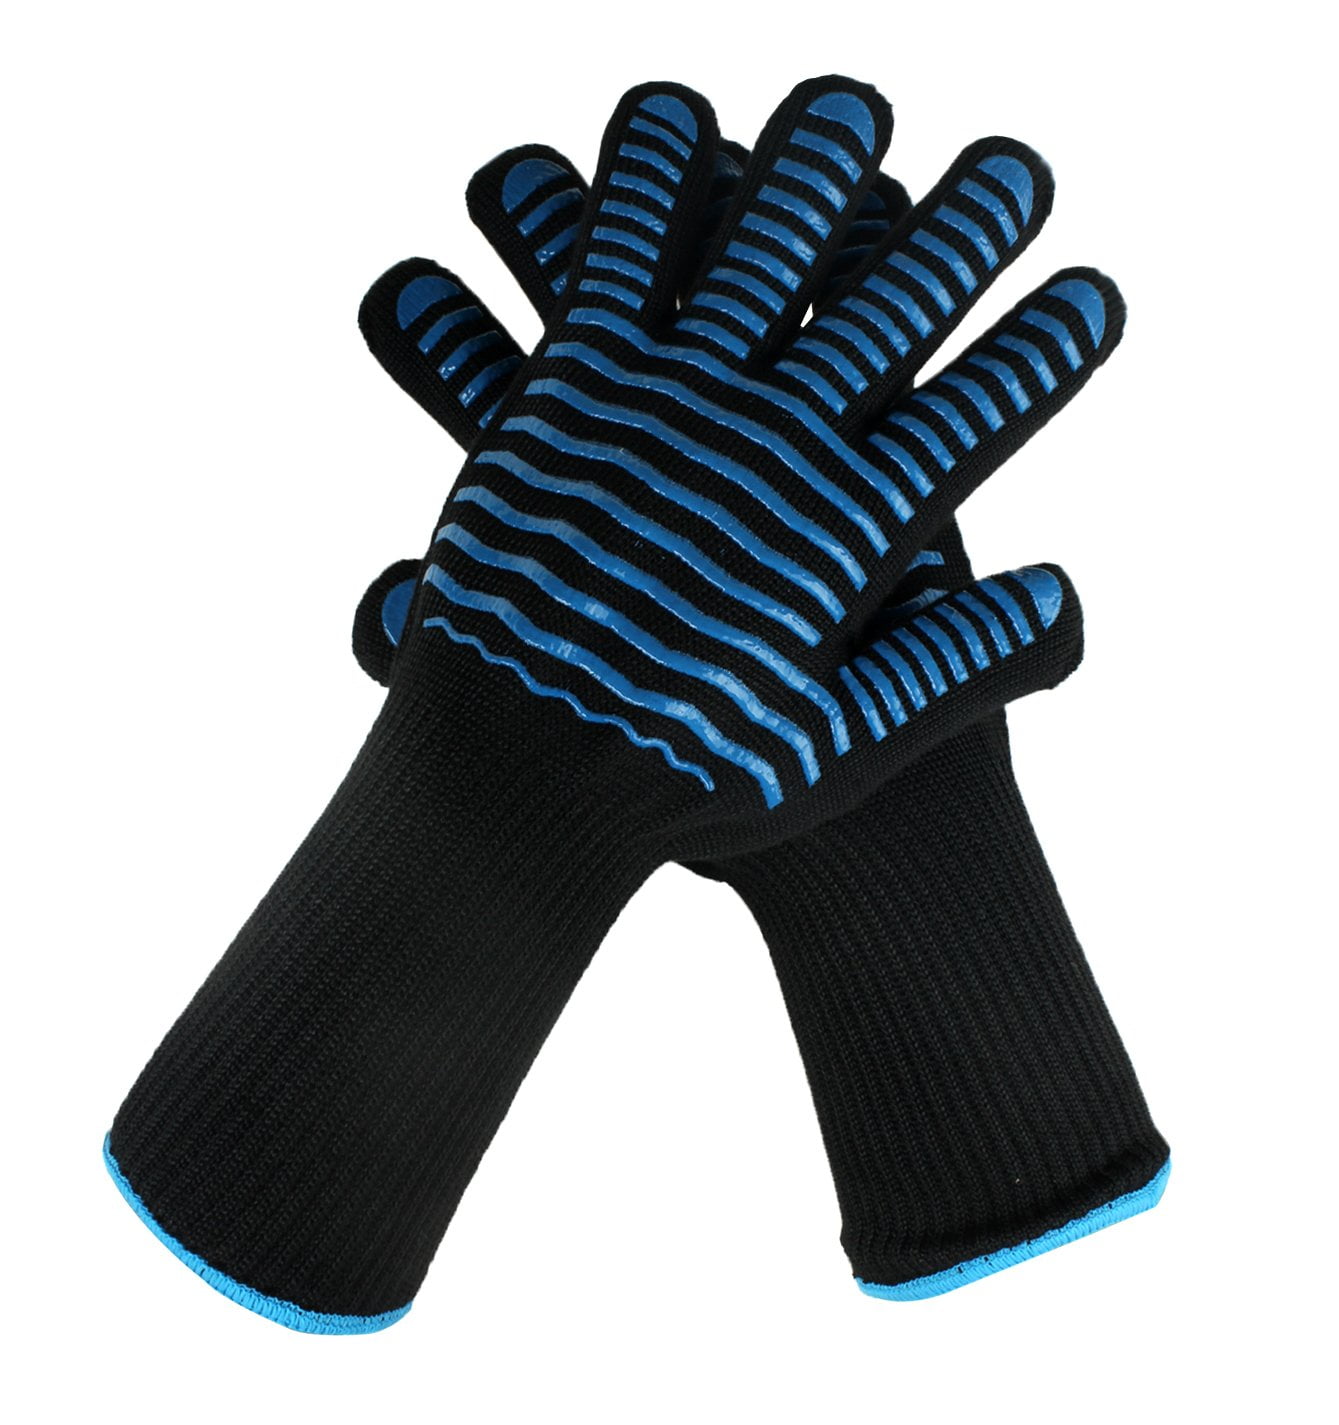 Wholesale heat resistant gloves for small hands of Different Colors and  Sizes –